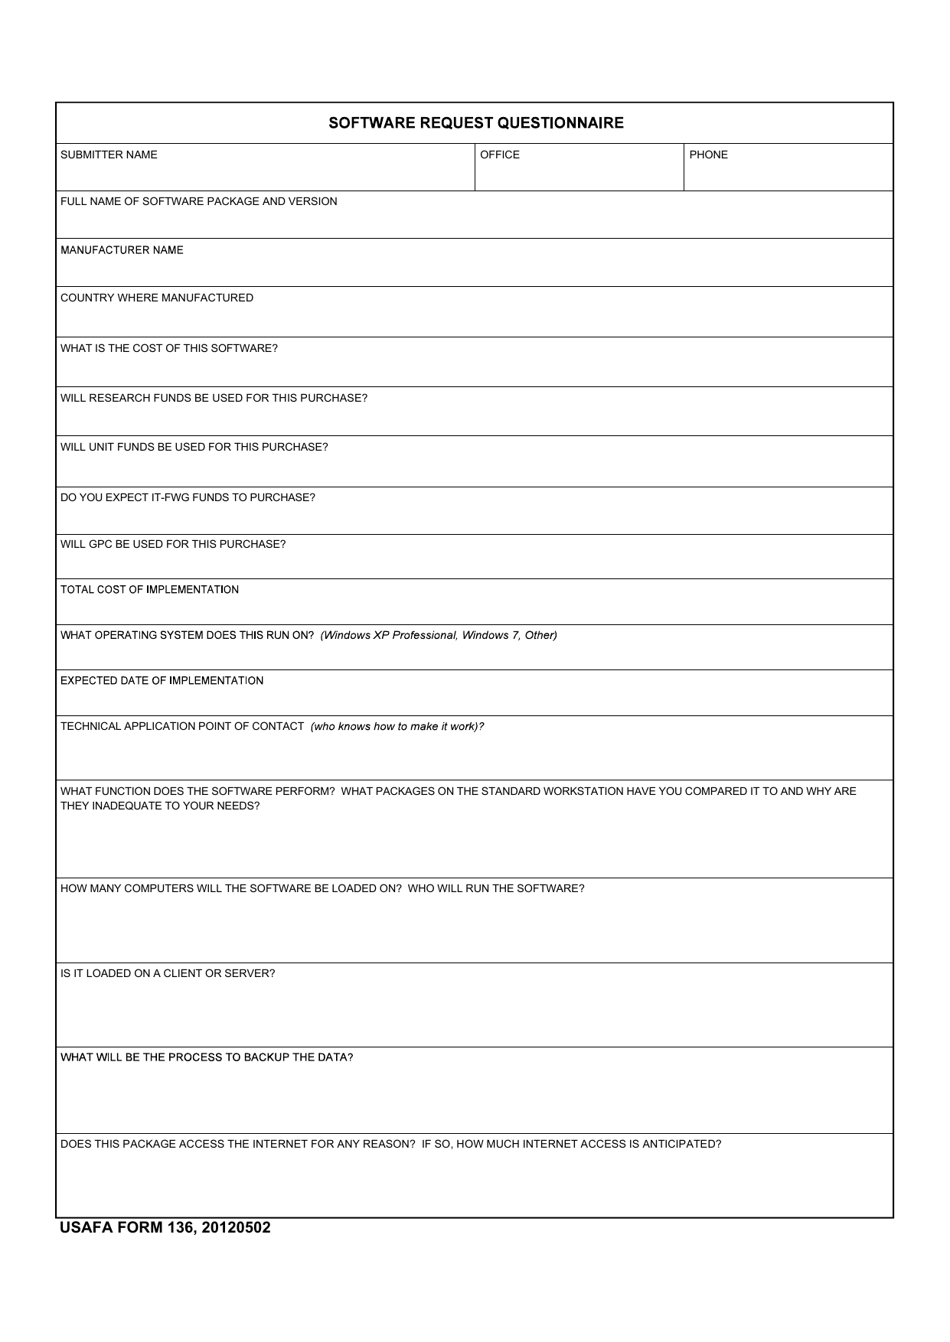 USAFA Form 136 Software Request Questionnaire, Page 1